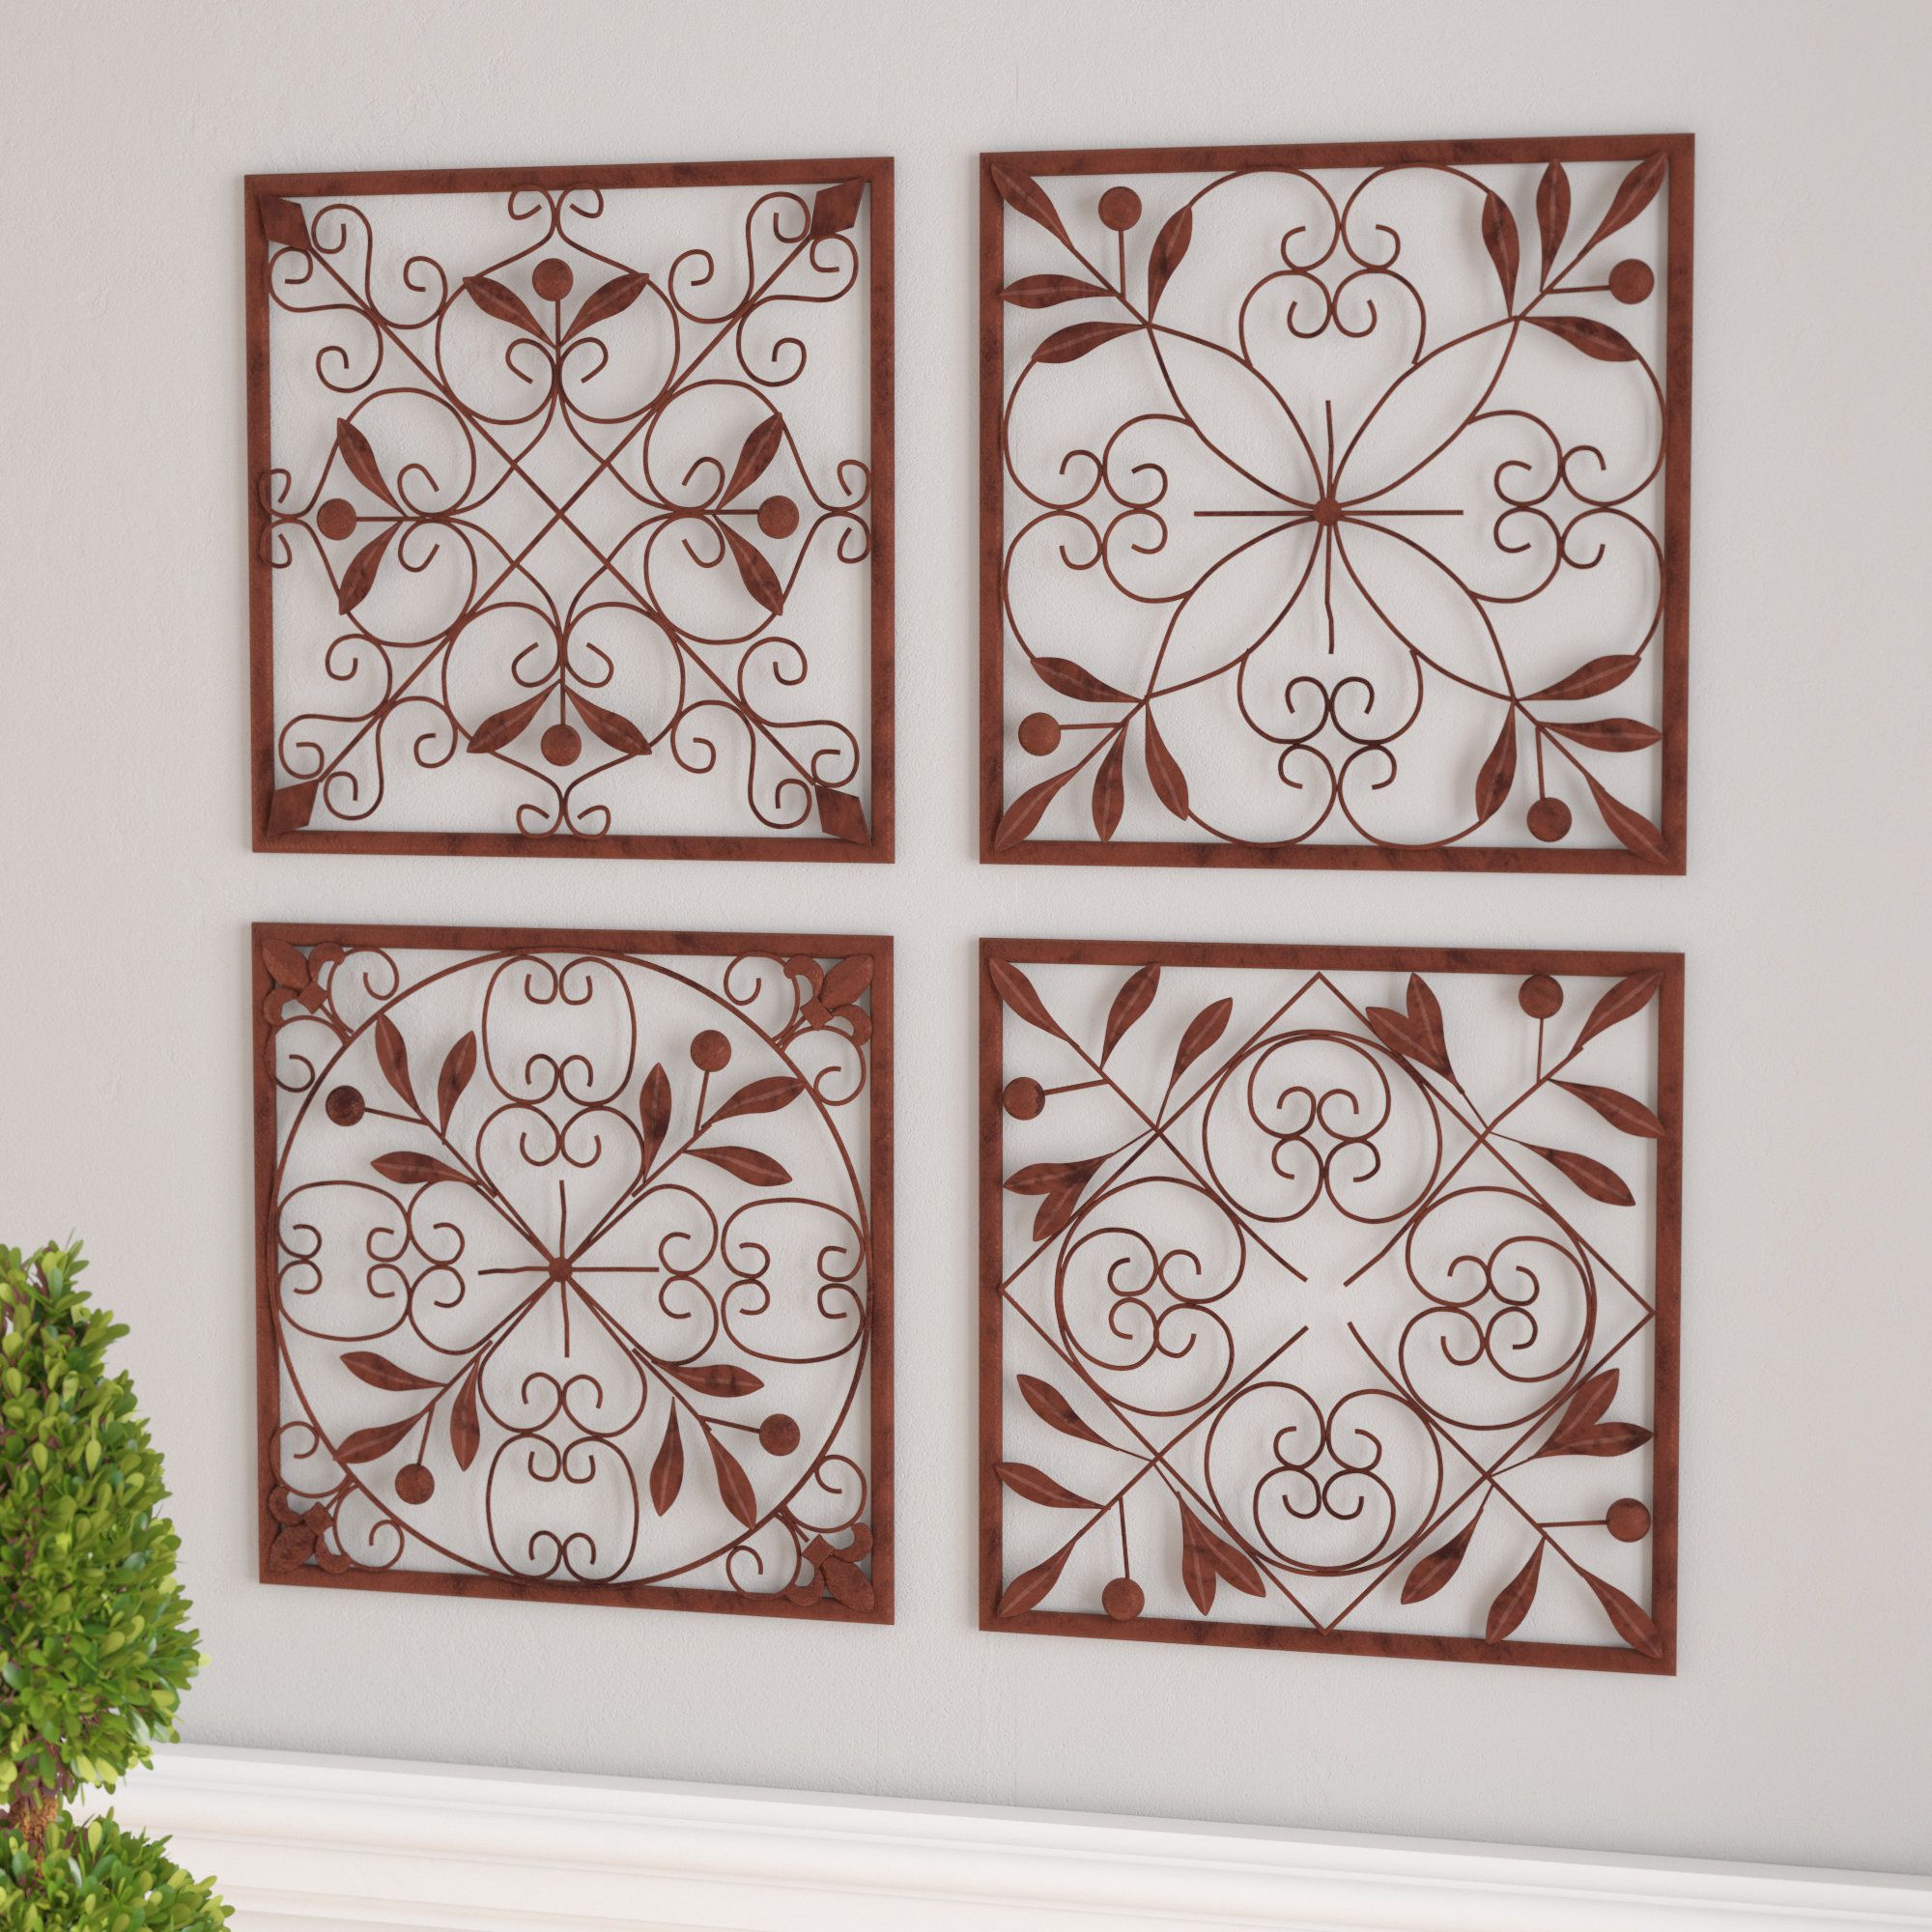 Charlton Home 4 Piece Wall Décor Set & Reviews | Wayfair Inside 4 Piece Wall Decor Sets By Charlton Home (Photo 1 of 30)